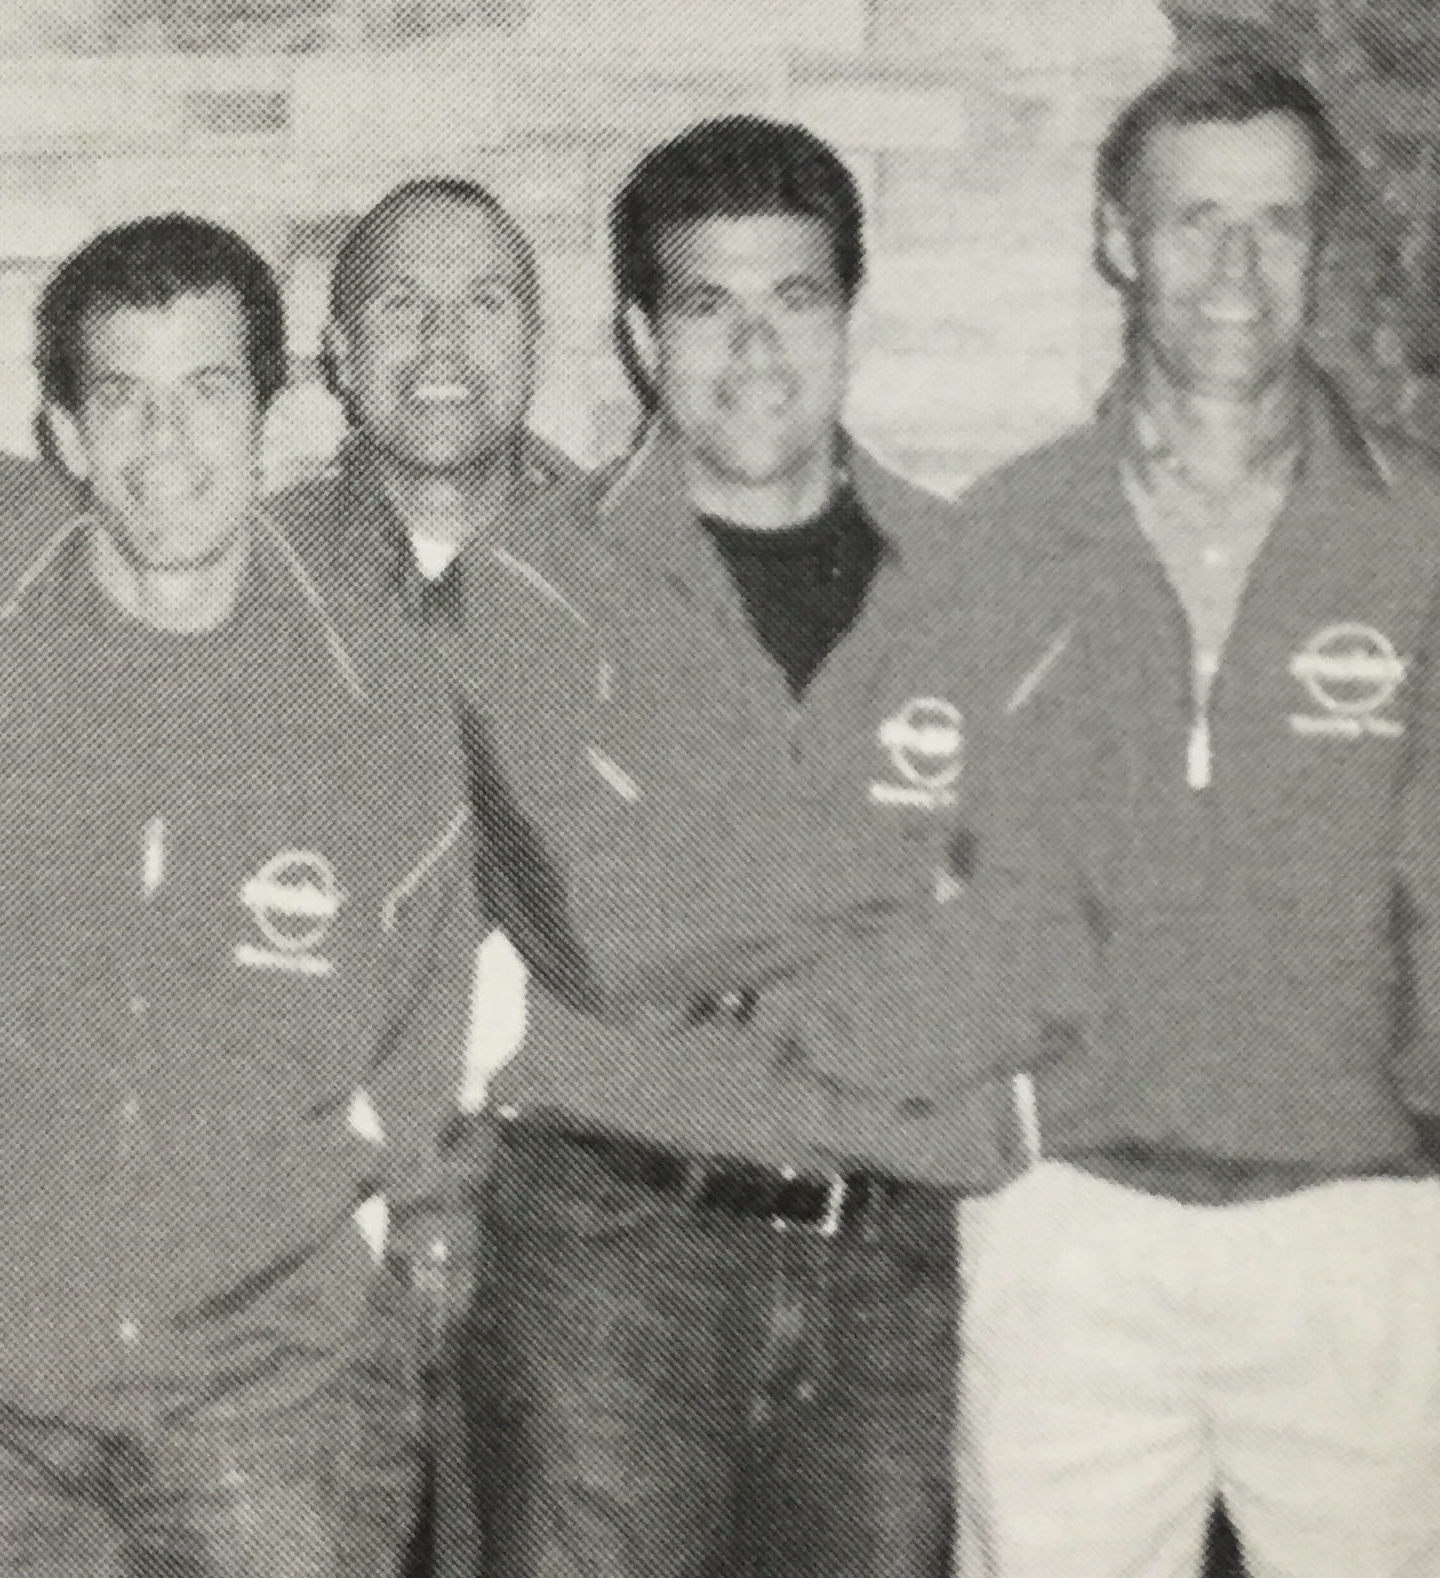 Gene Callaghan, Dan Klein, Mike Picini and Martin Slark in 2006; 4 early adopters of fitness and health at Molex